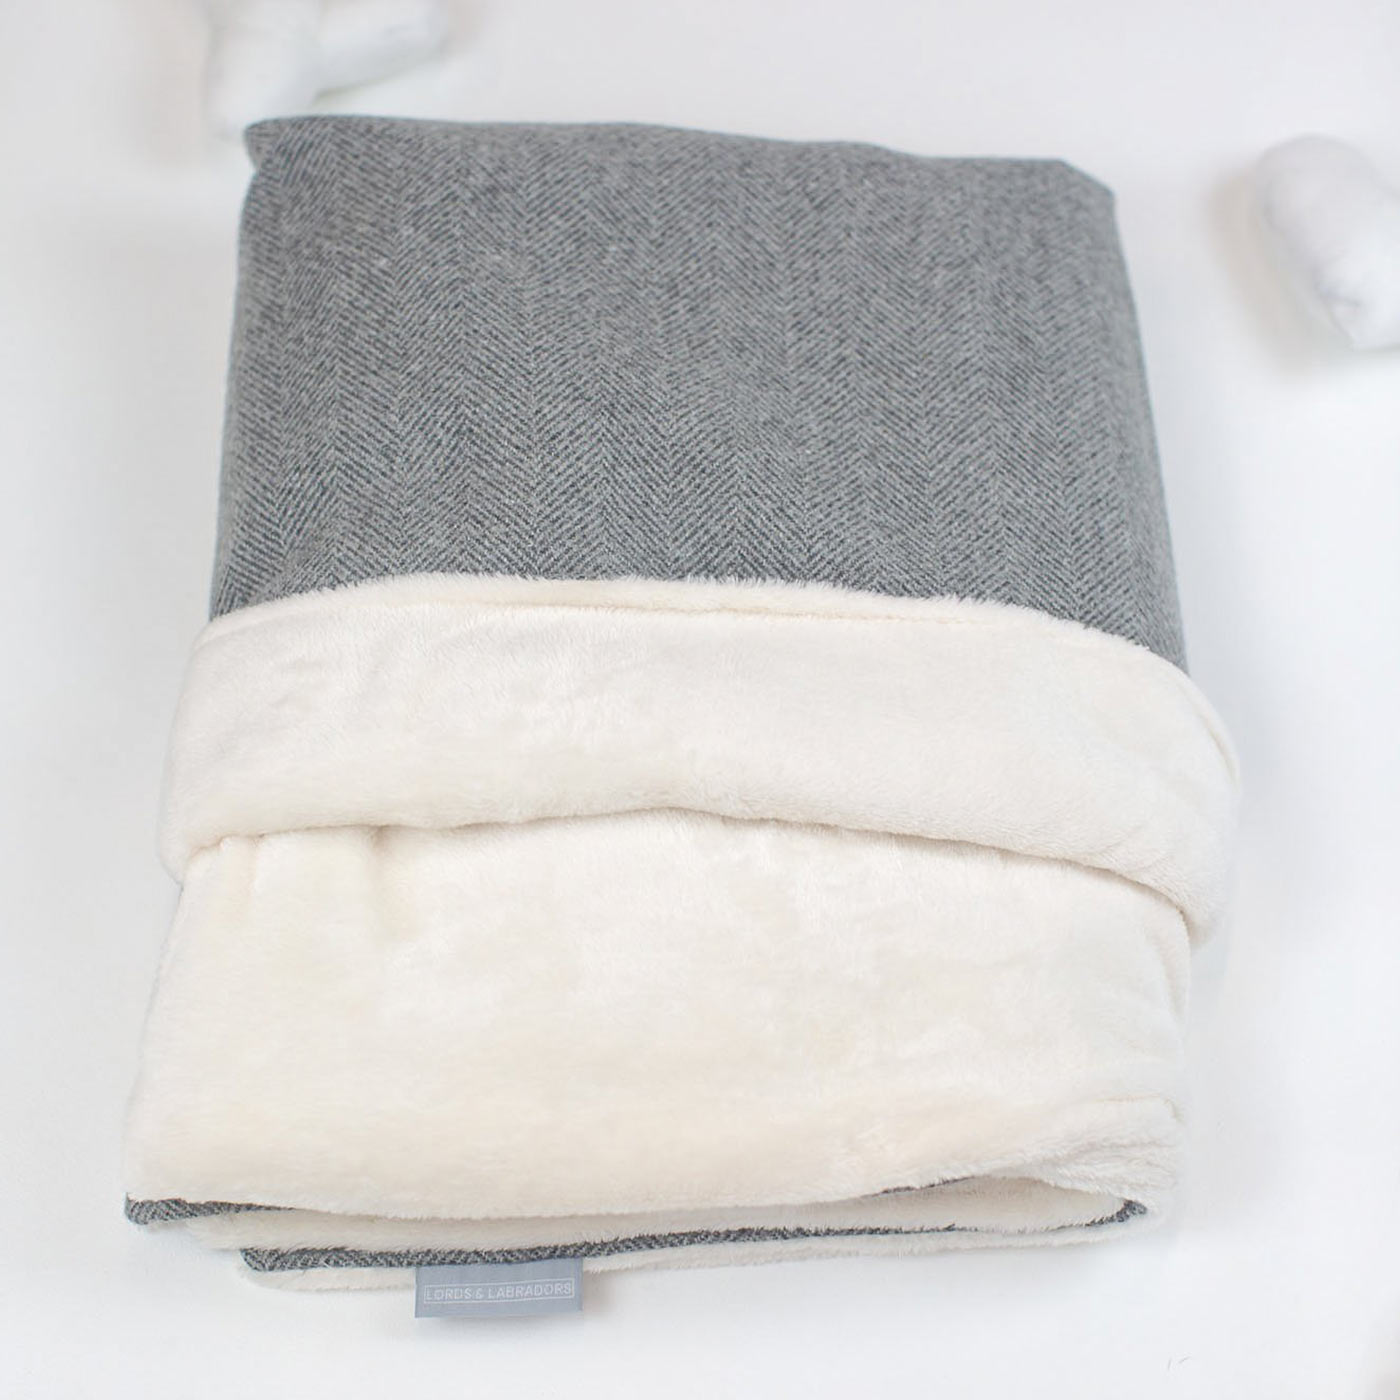  Super Soft Sherpa & Teddy Fleece Lining, Our Luxury Cat & Kitten Blanket In Stunning Pewter Herringbone Tweed The Perfect Cat Bed Accessory! Available To Personalise at Lords & Labradors